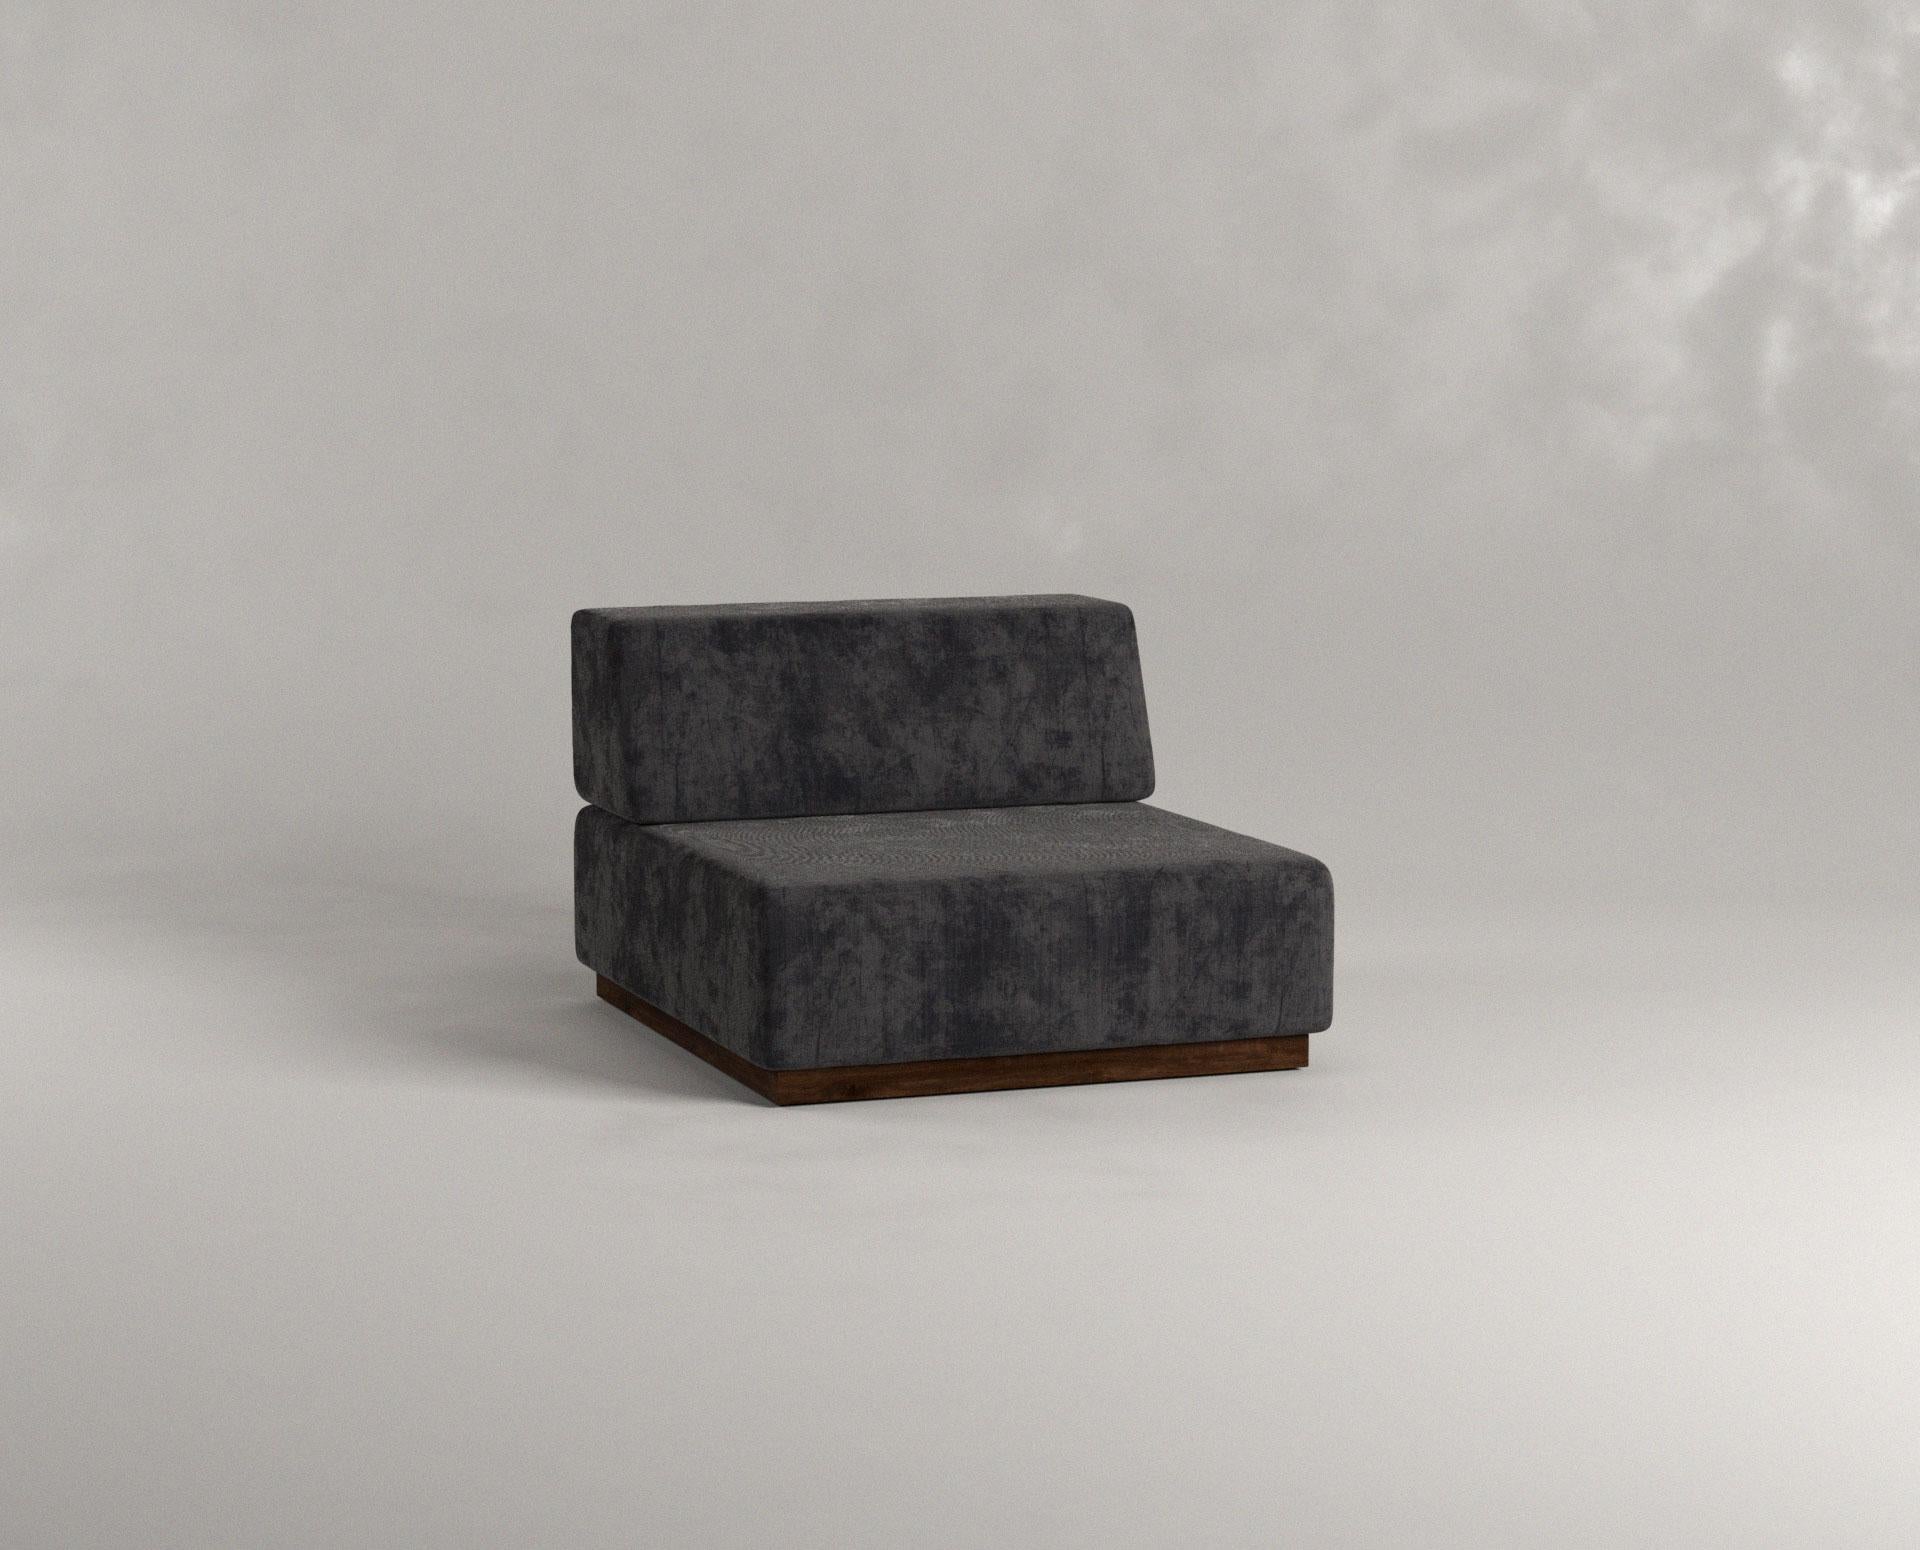 Black Nube Lounger by Siete Studio
Dimensions: D 100 x W 80 x H 60 cm.
Materials: Walnut, cushions, upholstery.

Characterised by its round edges and soft white cushions, Nube carries the comforting sensation of falling into a cloud.
The framework